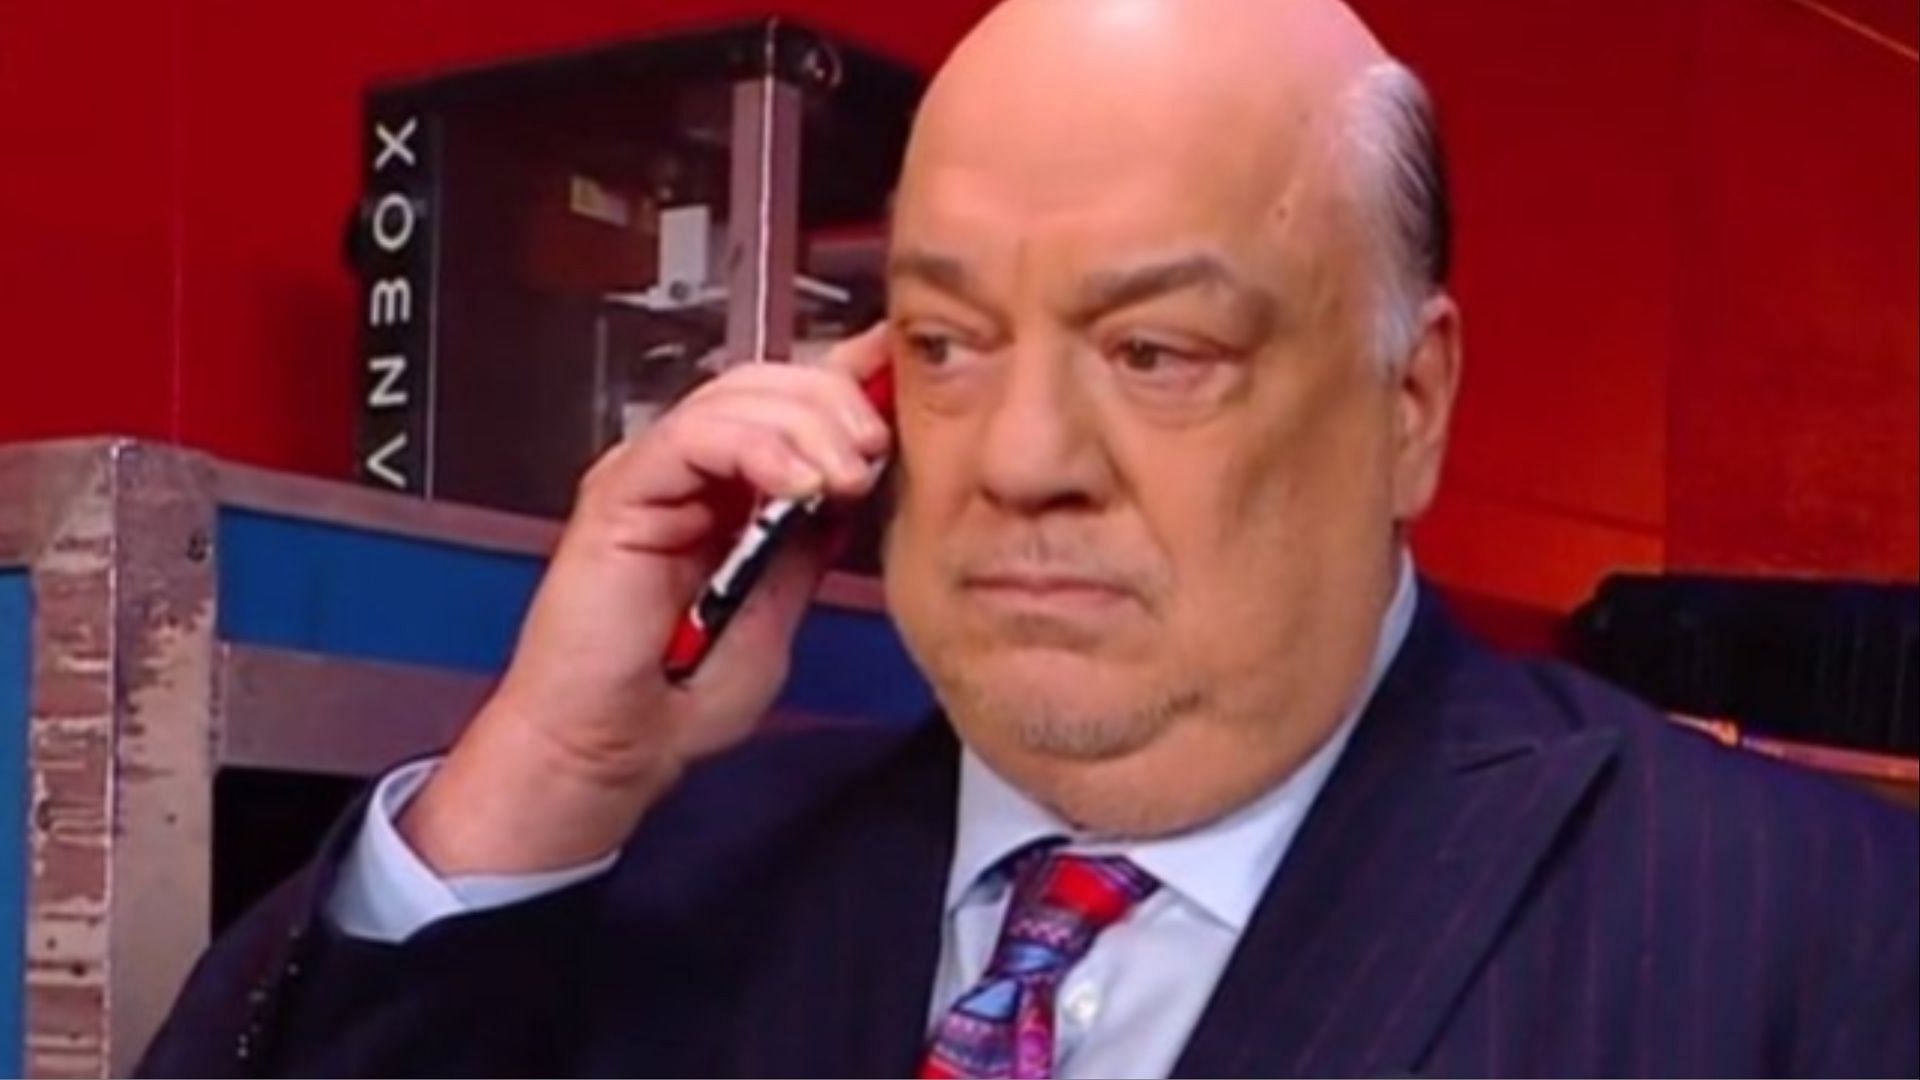 Paul Heyman was on the phone with someone on WWE SmackDown.